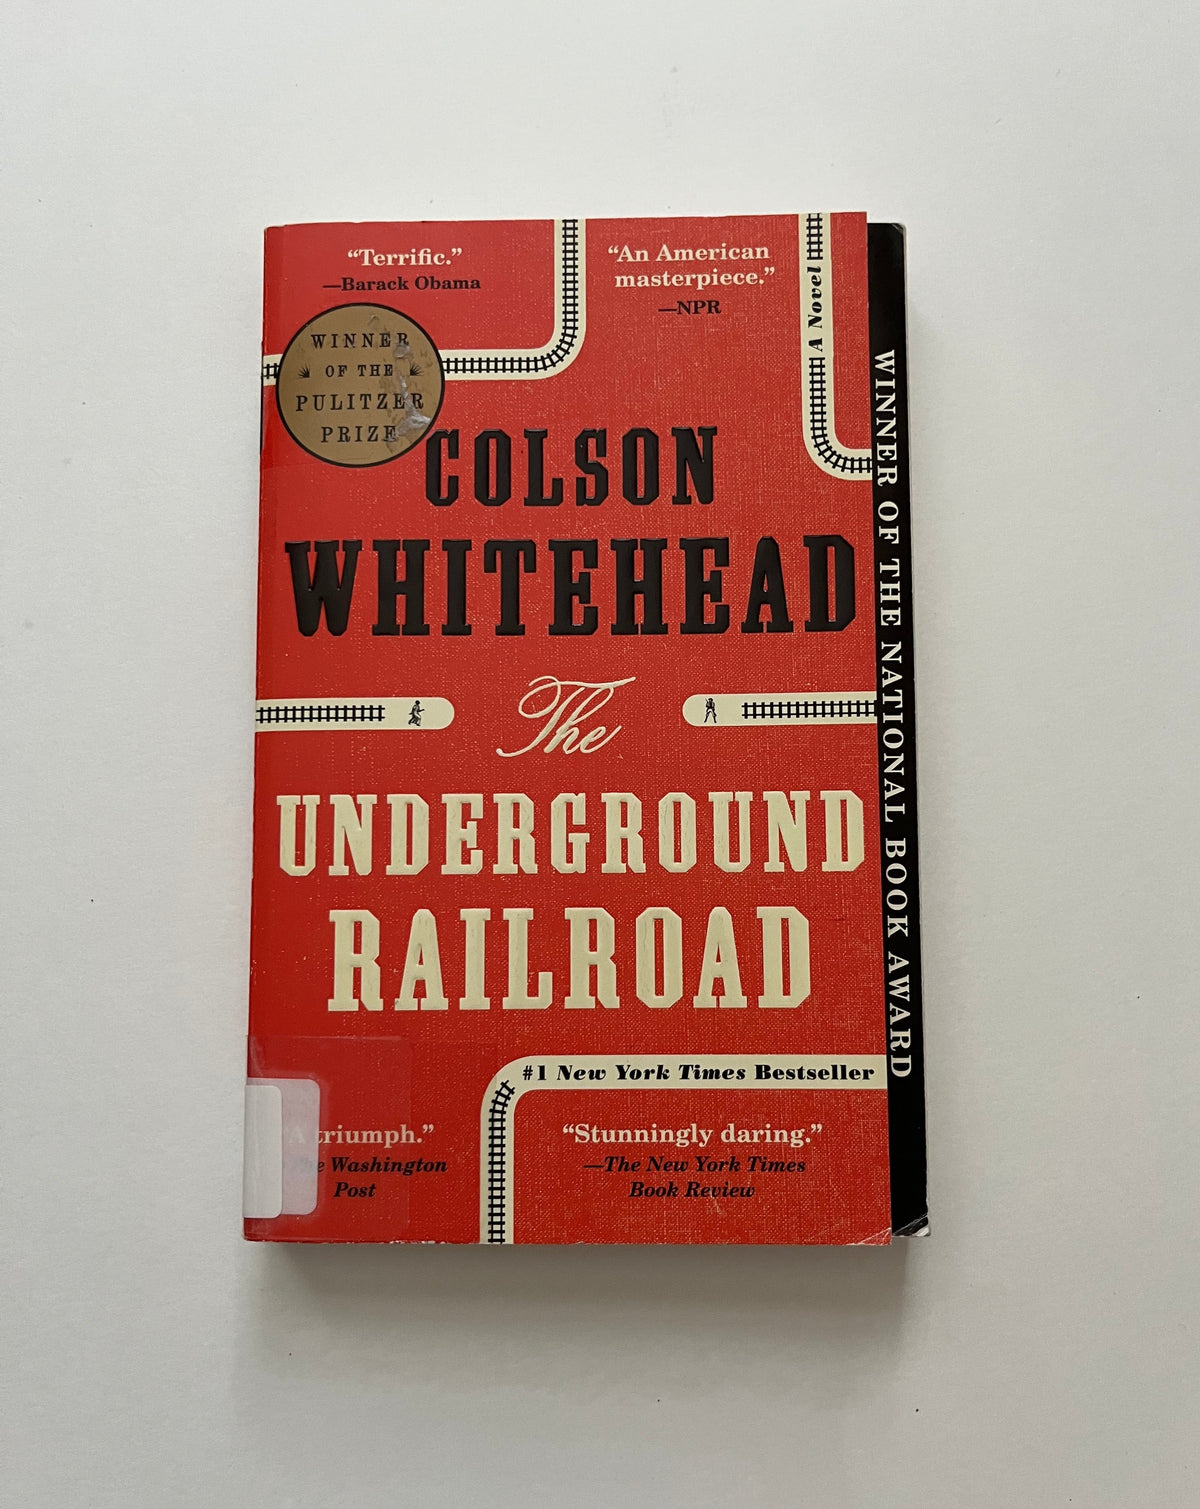 DONATE: The Underground Railroad by Colson Whitehead